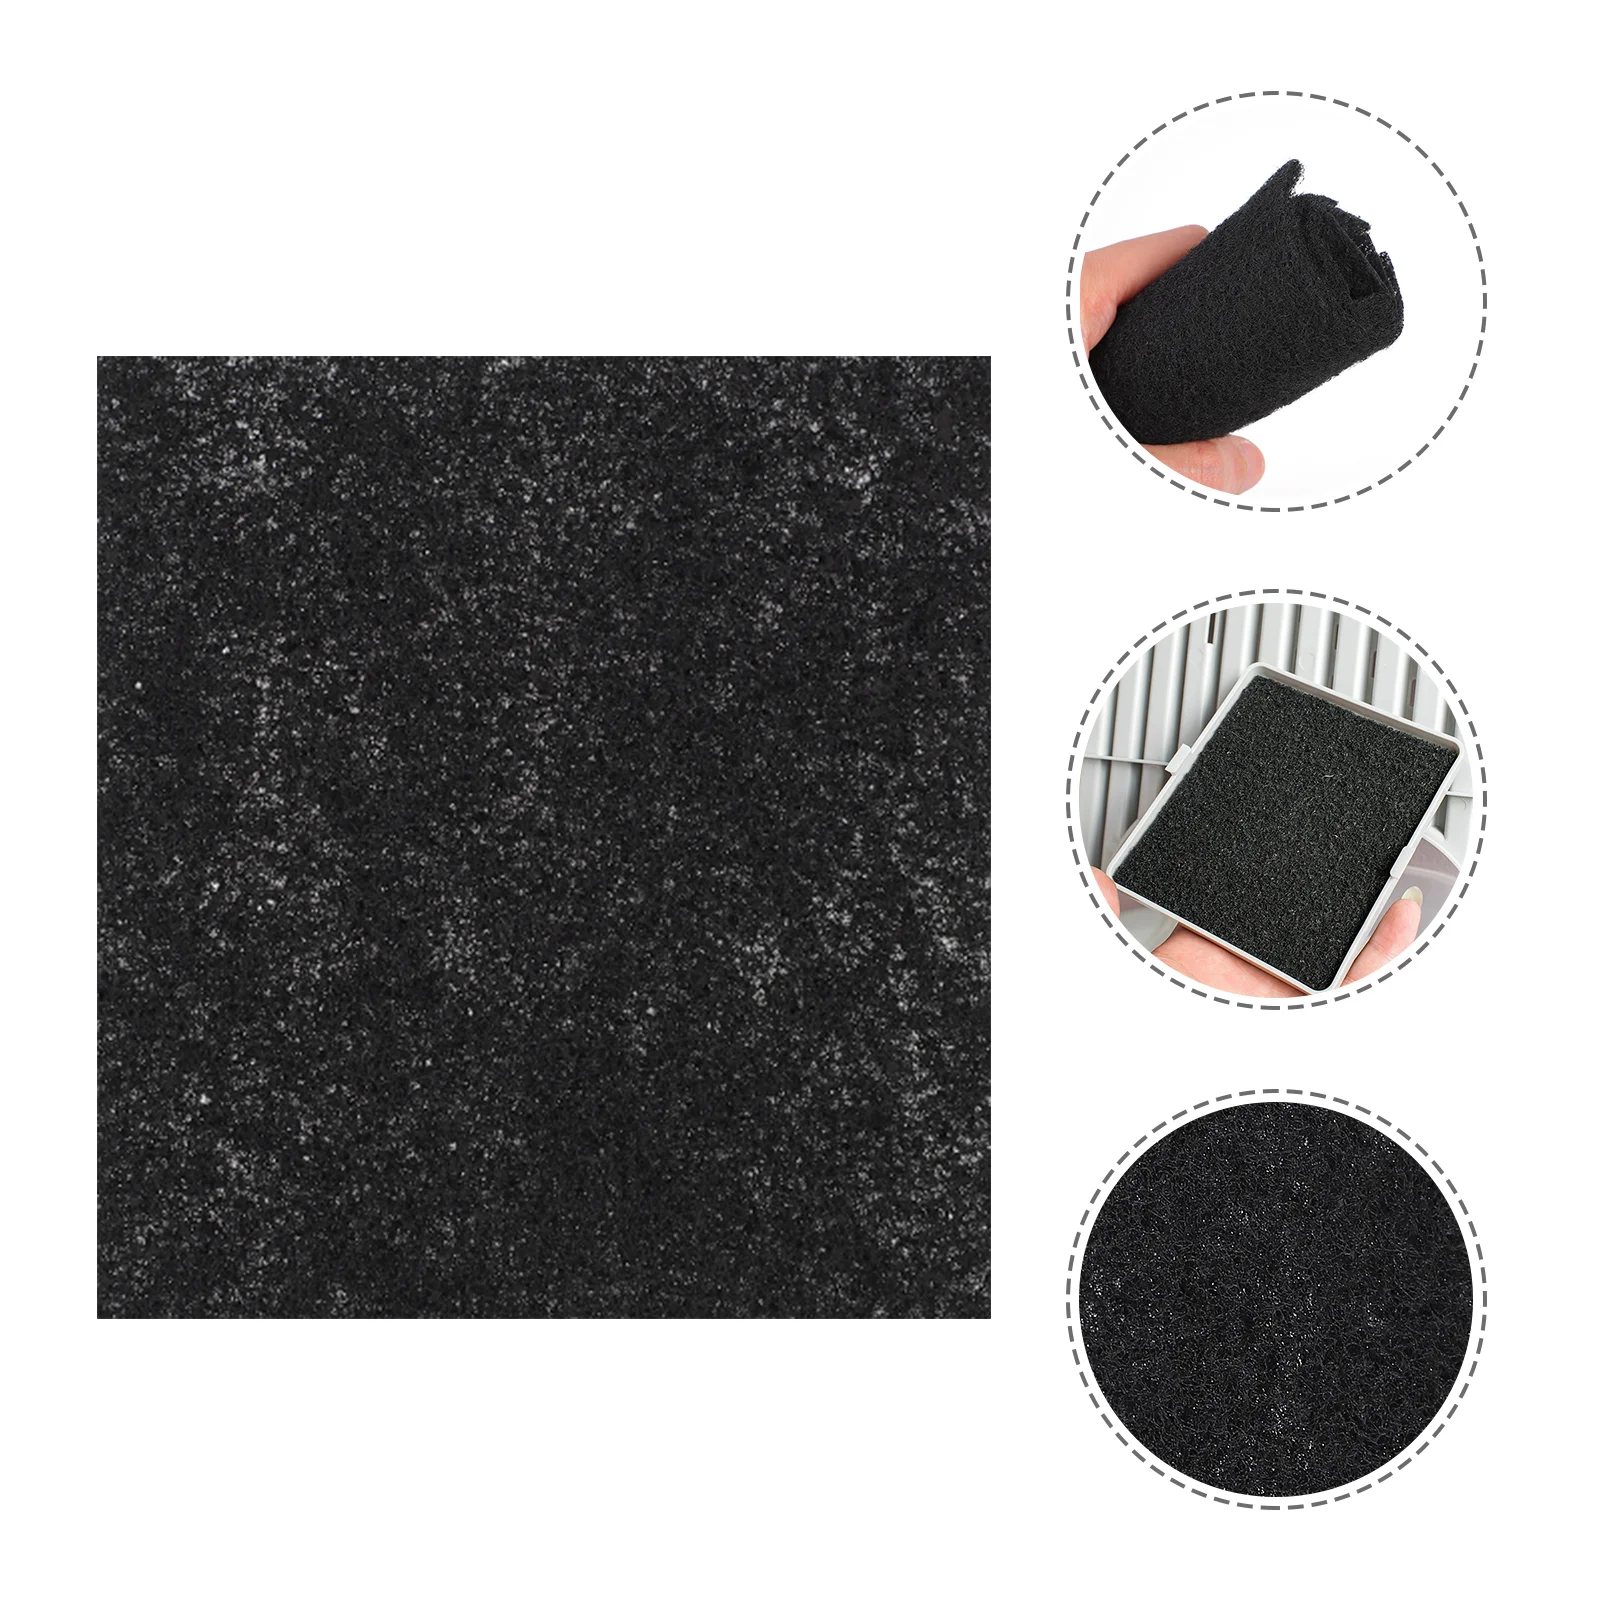 

24 Pcs Cat Deodorant Tablets Garbage Can With Lid Filter Replacements Activated Carbon Litter Box Mat Charcoal Deodorizing Pad